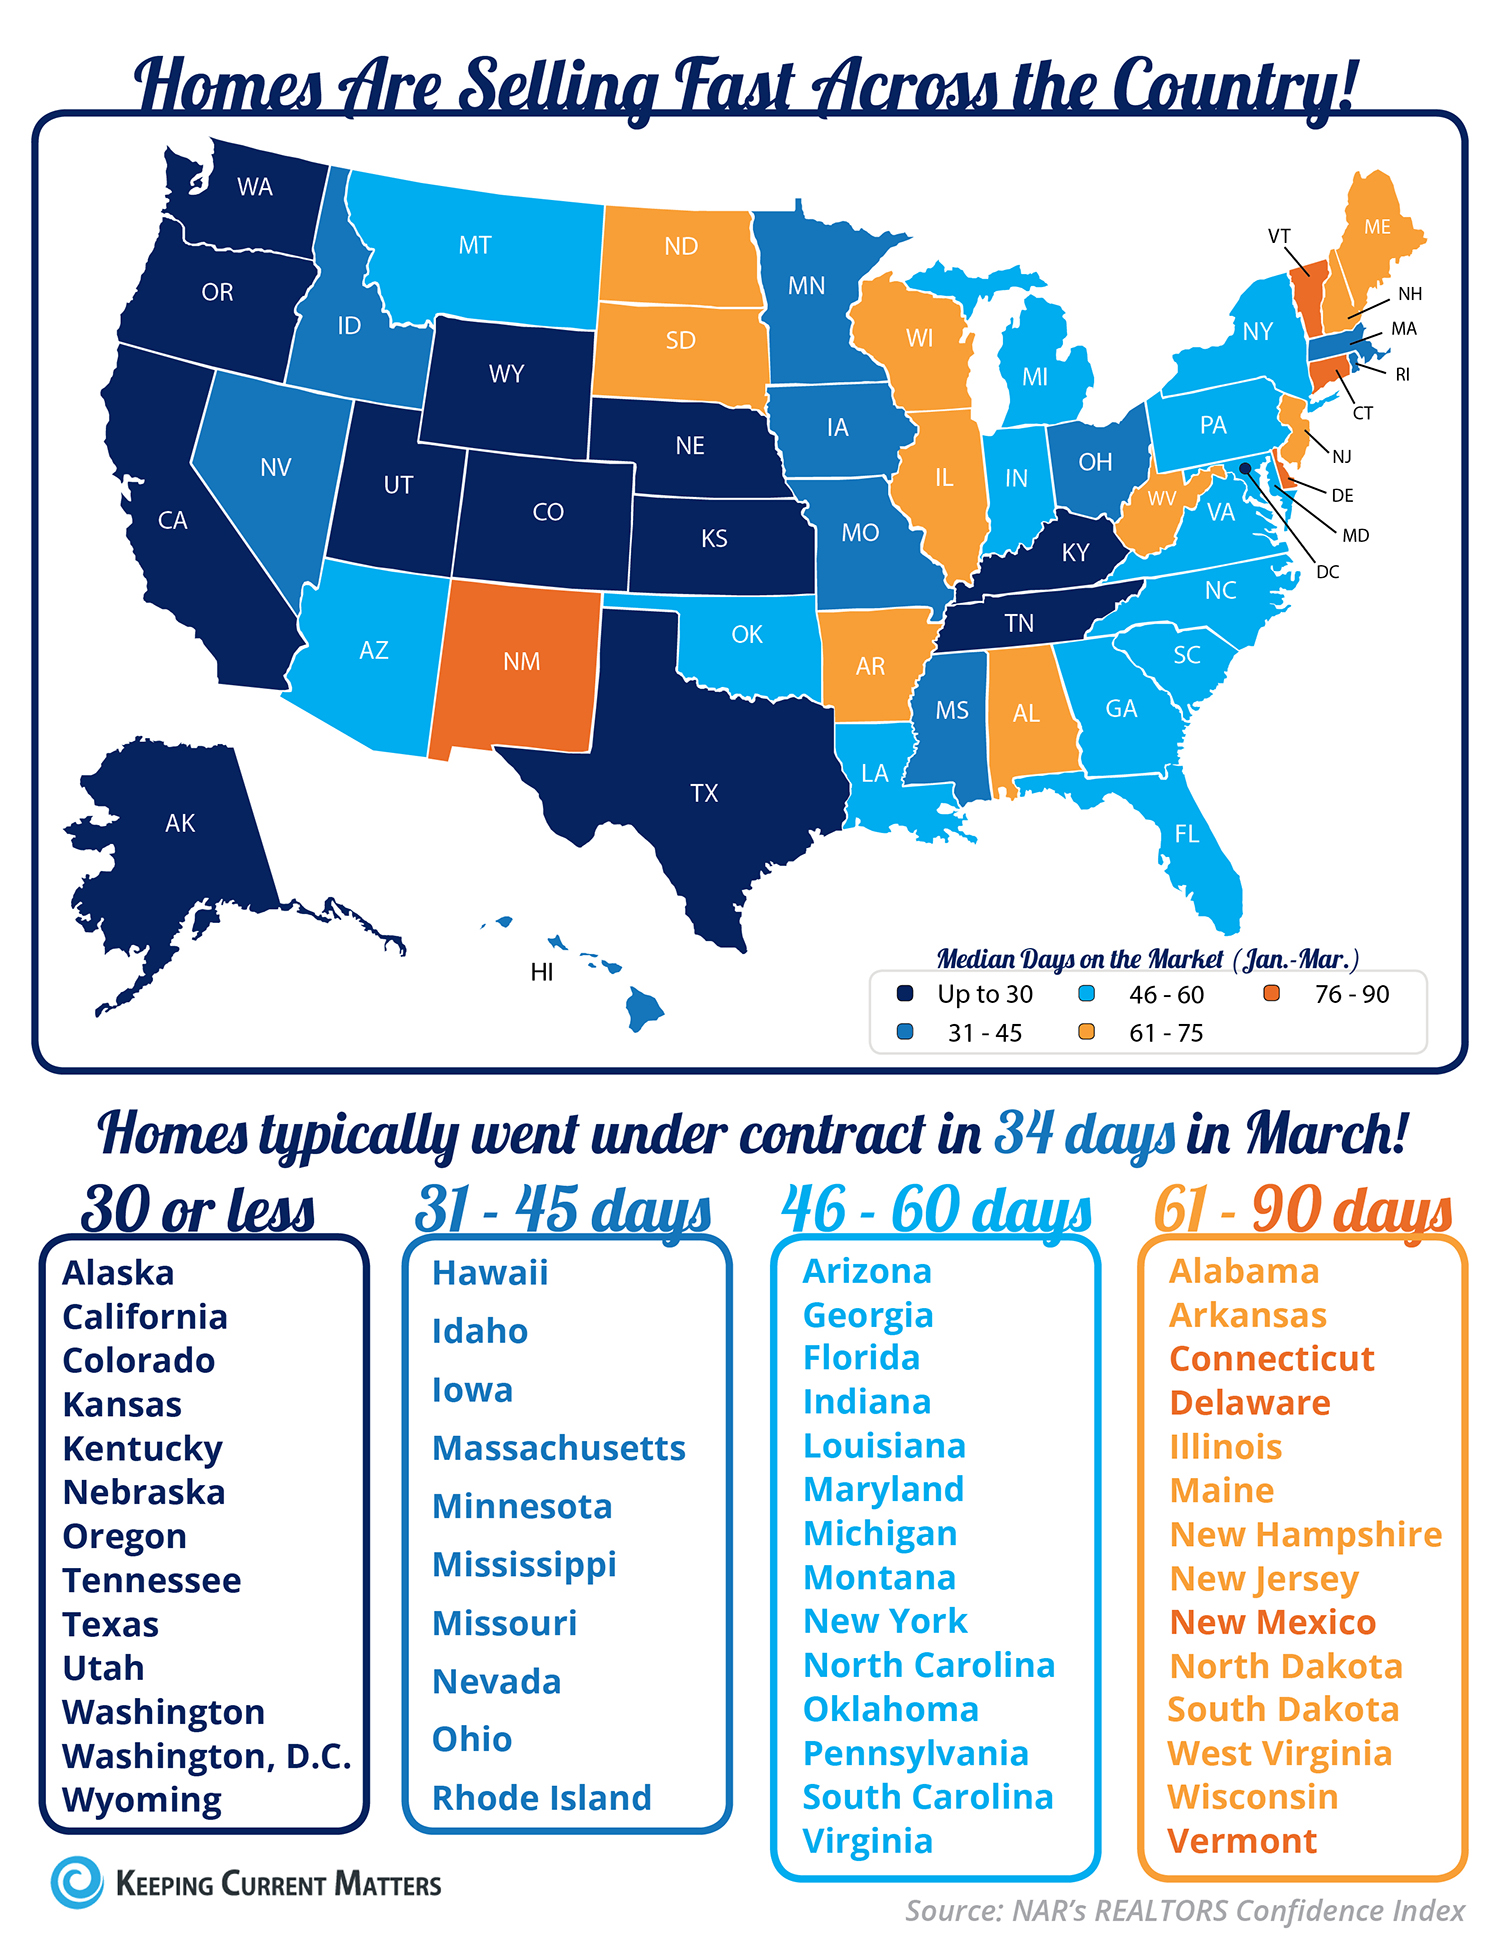 Homes are Selling Fast Across the Country [INFOGRAPHIC] | Keeping Current Matters